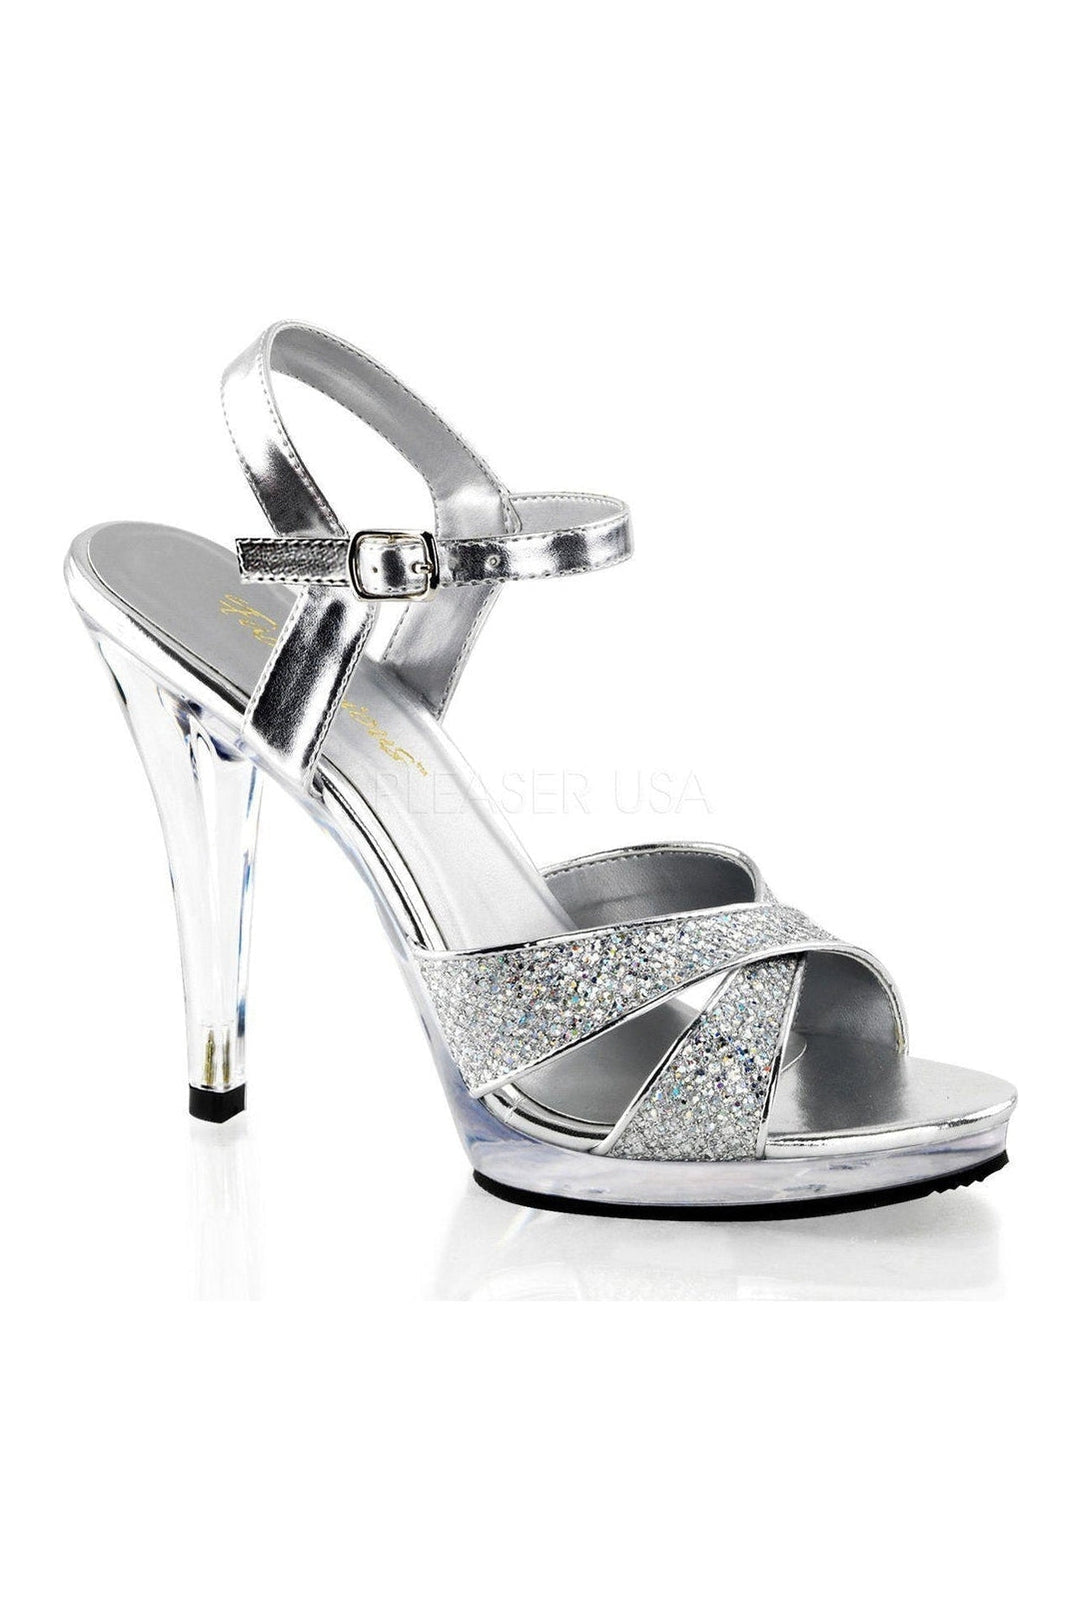 FLAIR-419(G) Sandal | Clear Glitter-Fabulicious-Clear-Sandals-SEXYSHOES.COM